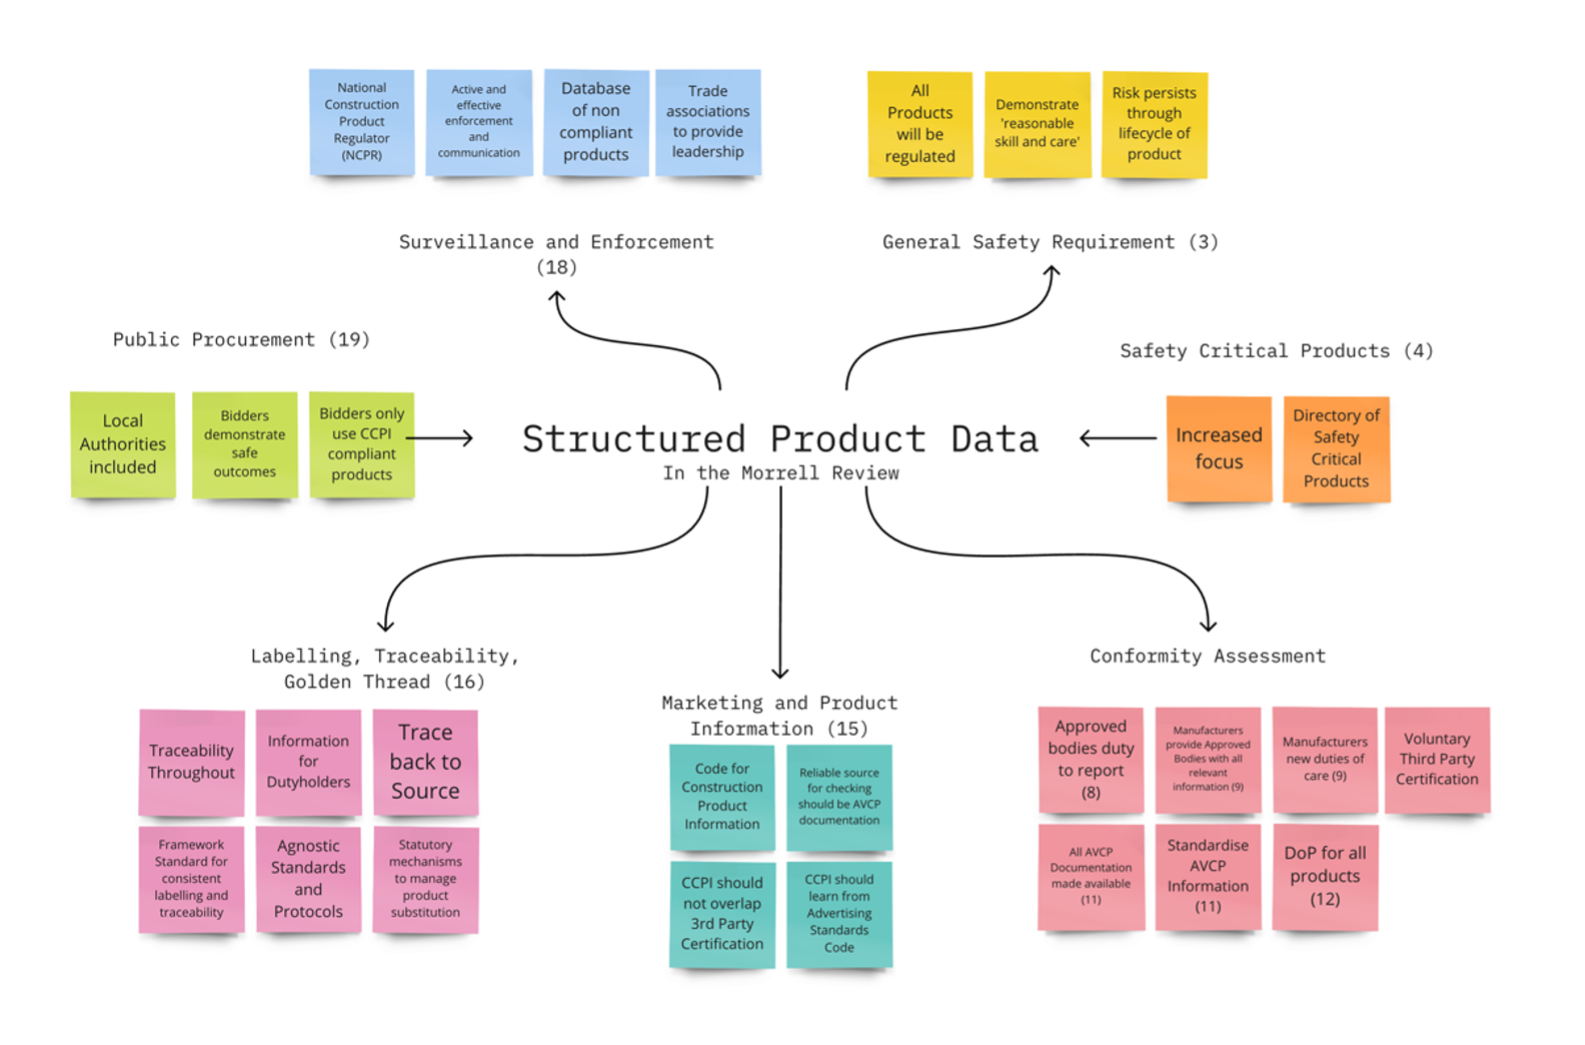 The Morrell Review and Structured Construction Product Data